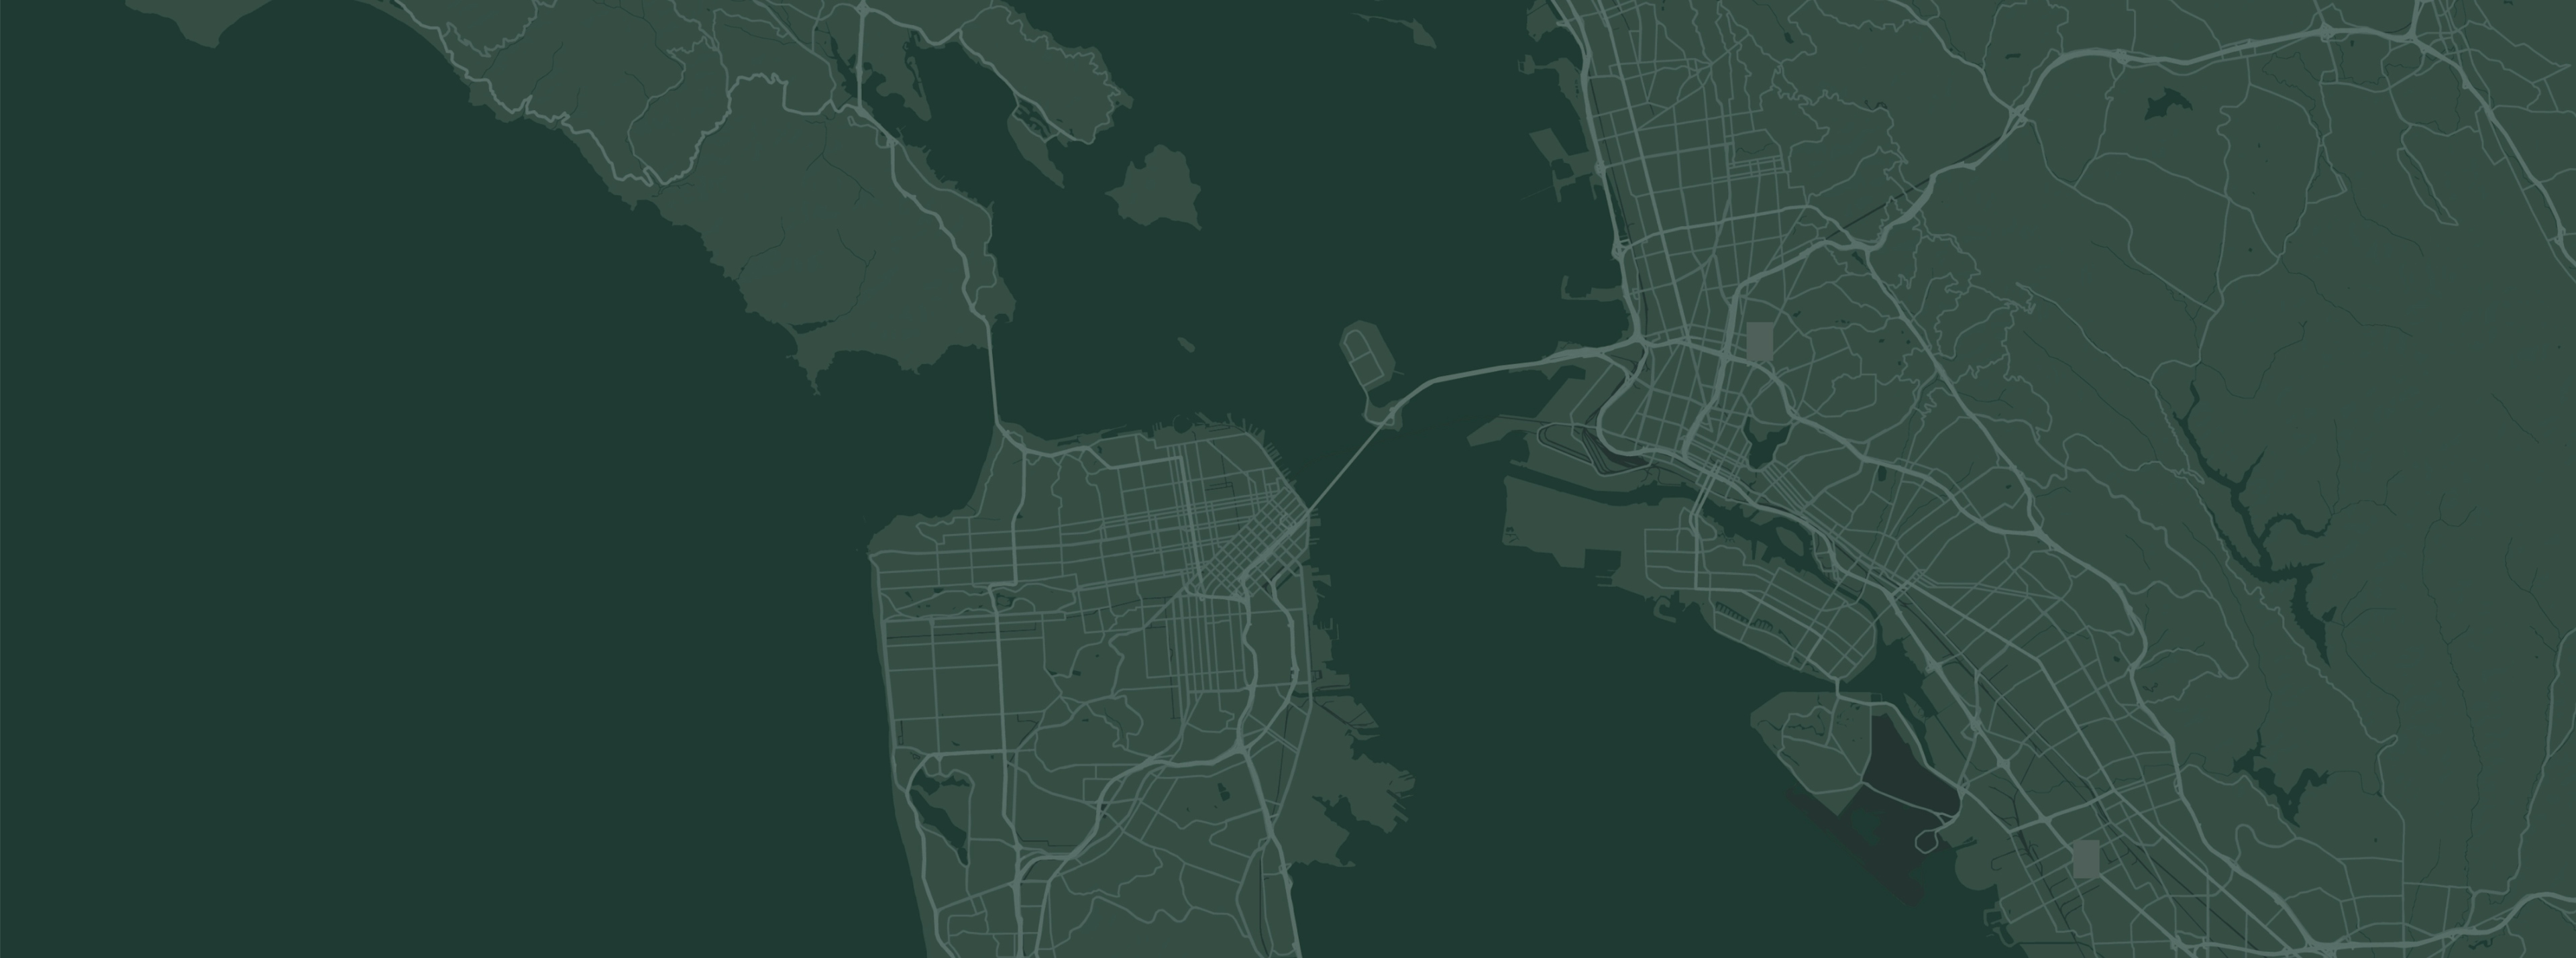 Decorative map of the San Francisco Bay centered on San Francisco.